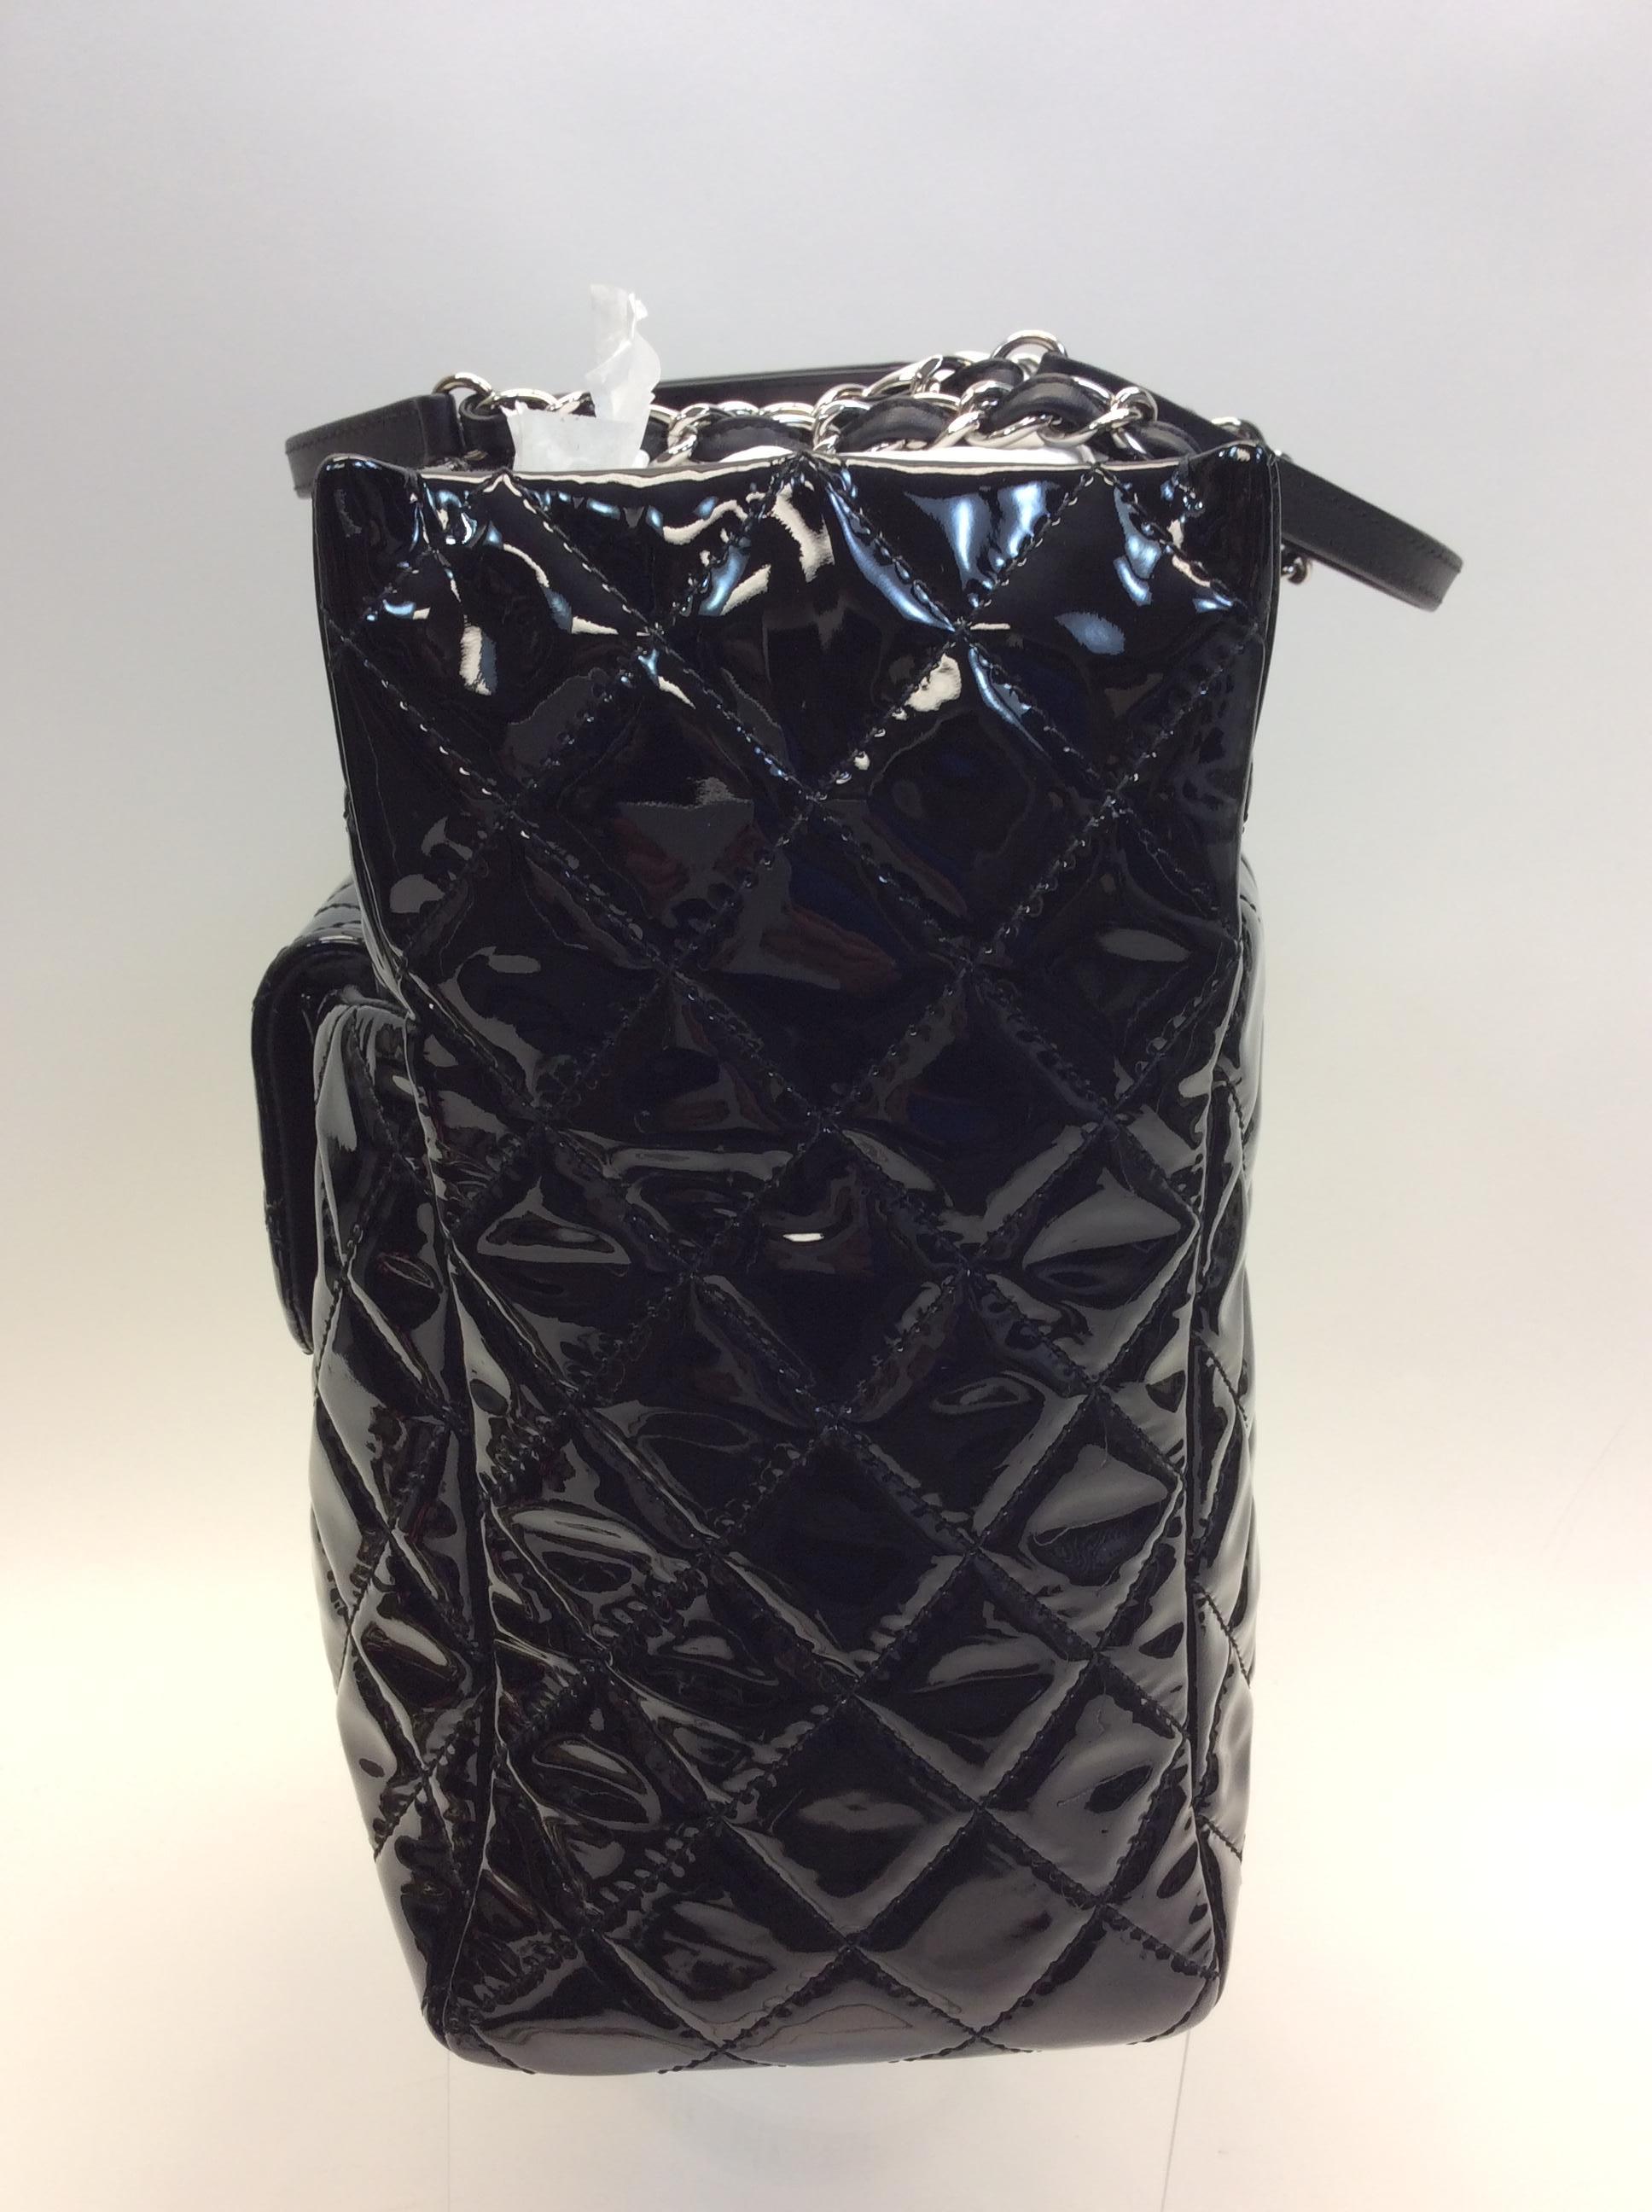 Chanel Black Patent Leather Large Shopping Tote NWT
$1999
Made in France
Patent Leather
14